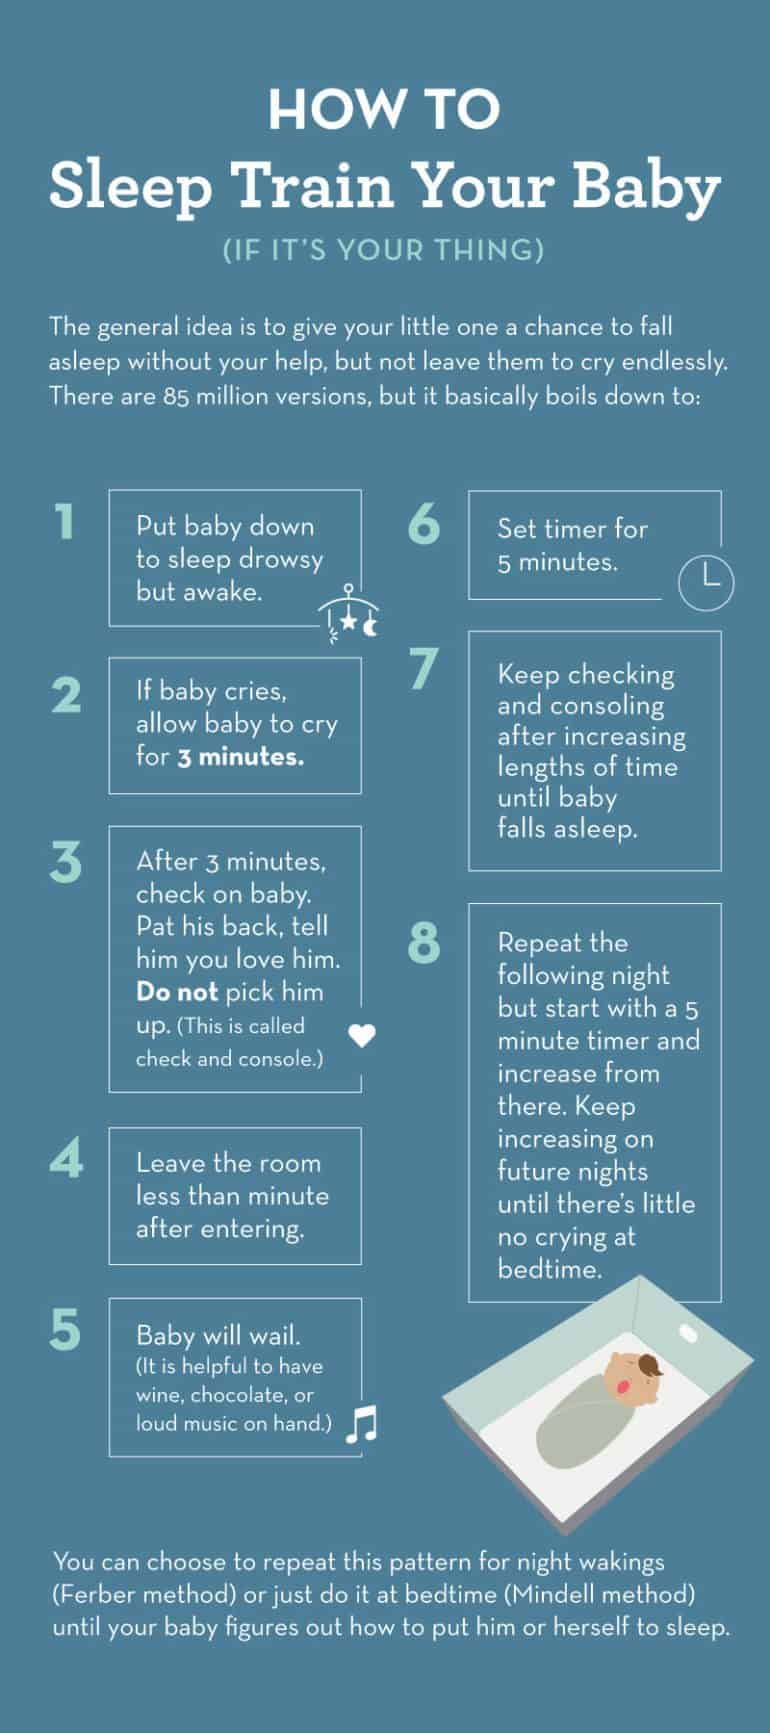 A step-by-step guide for sleep training your baby or toddler based on methods from dozens of baby sleep books.